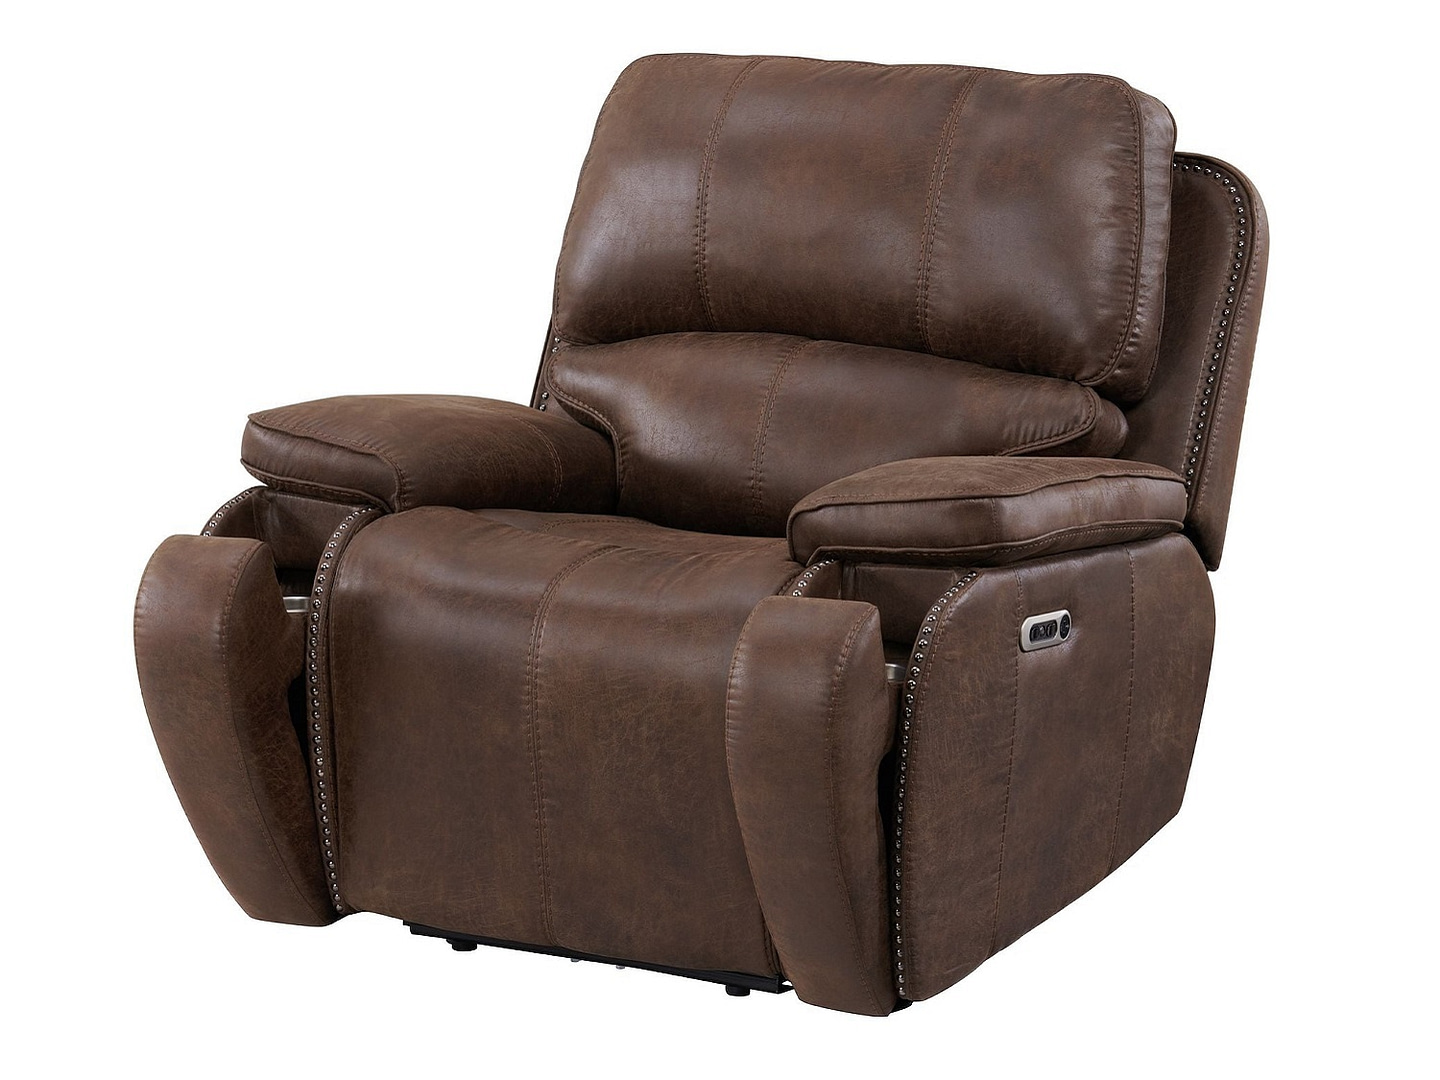 HARVEY Power Recliner Chair - Pull Out Cupholders